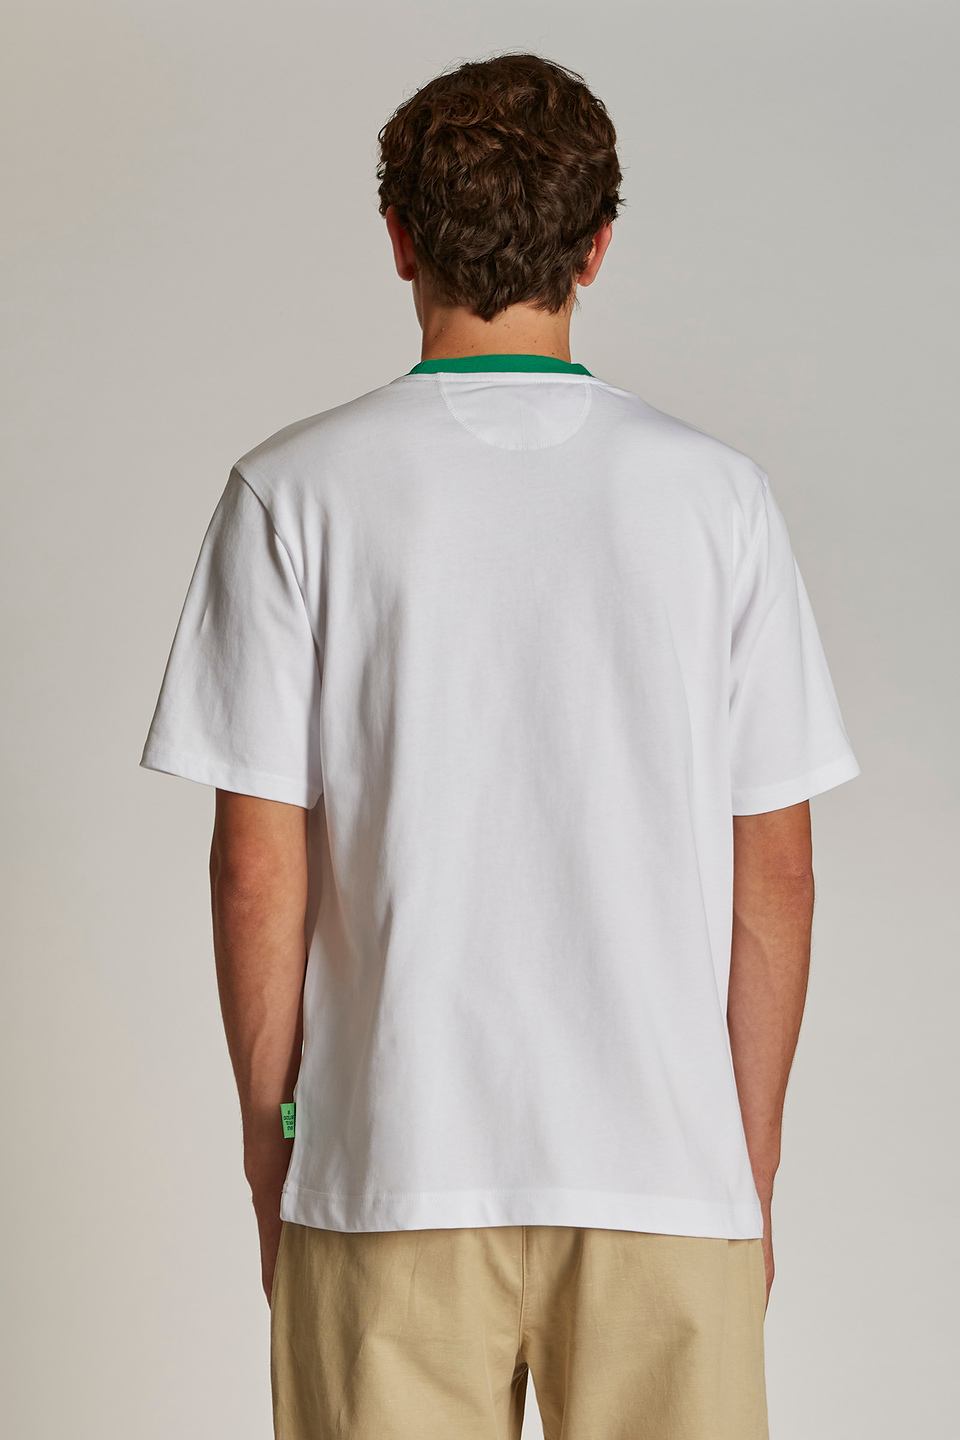 Men's oversized short-sleeved T-shirt featuring a contrasting collar | La Martina - Official Online Shop